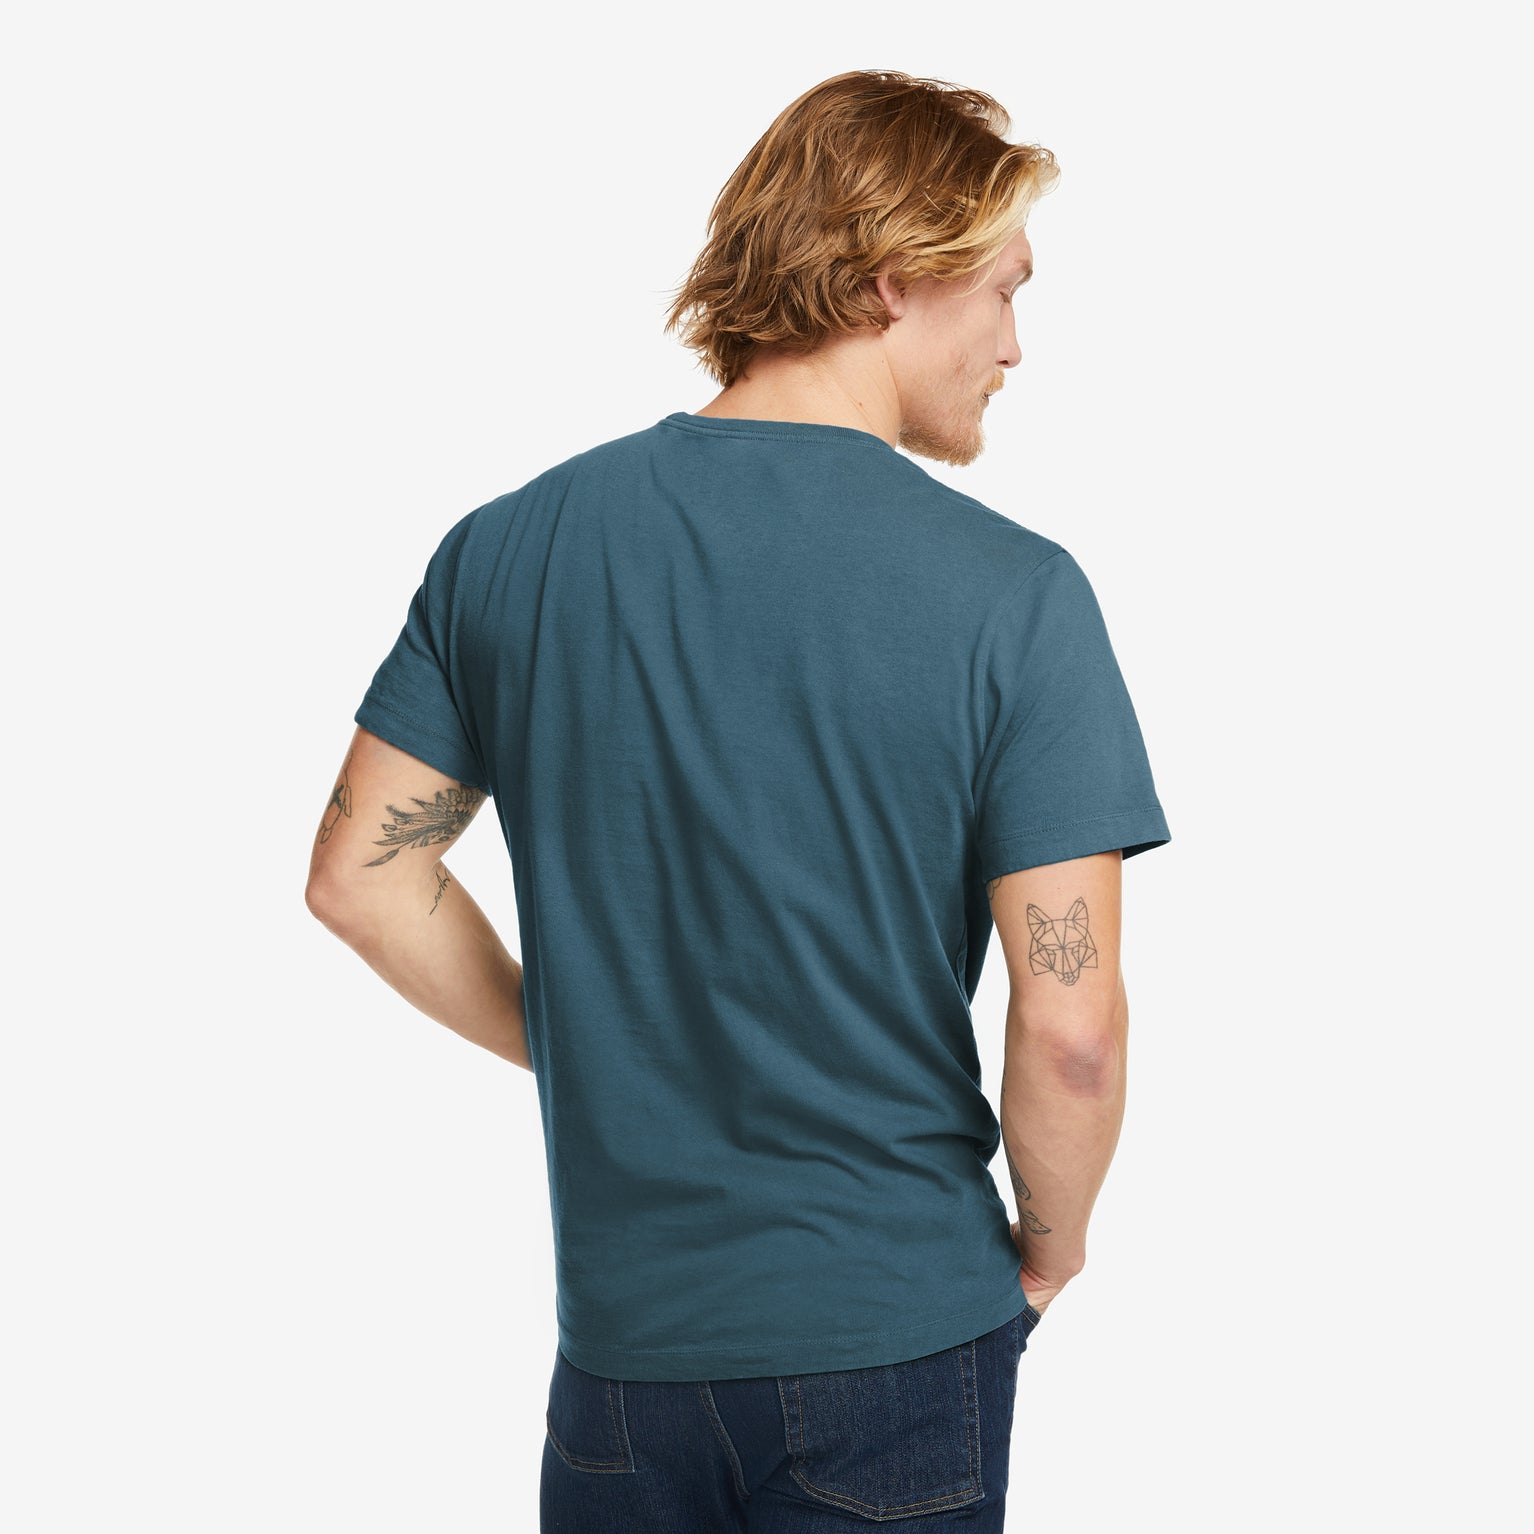 American Made Men's T-Shirts | American Giant